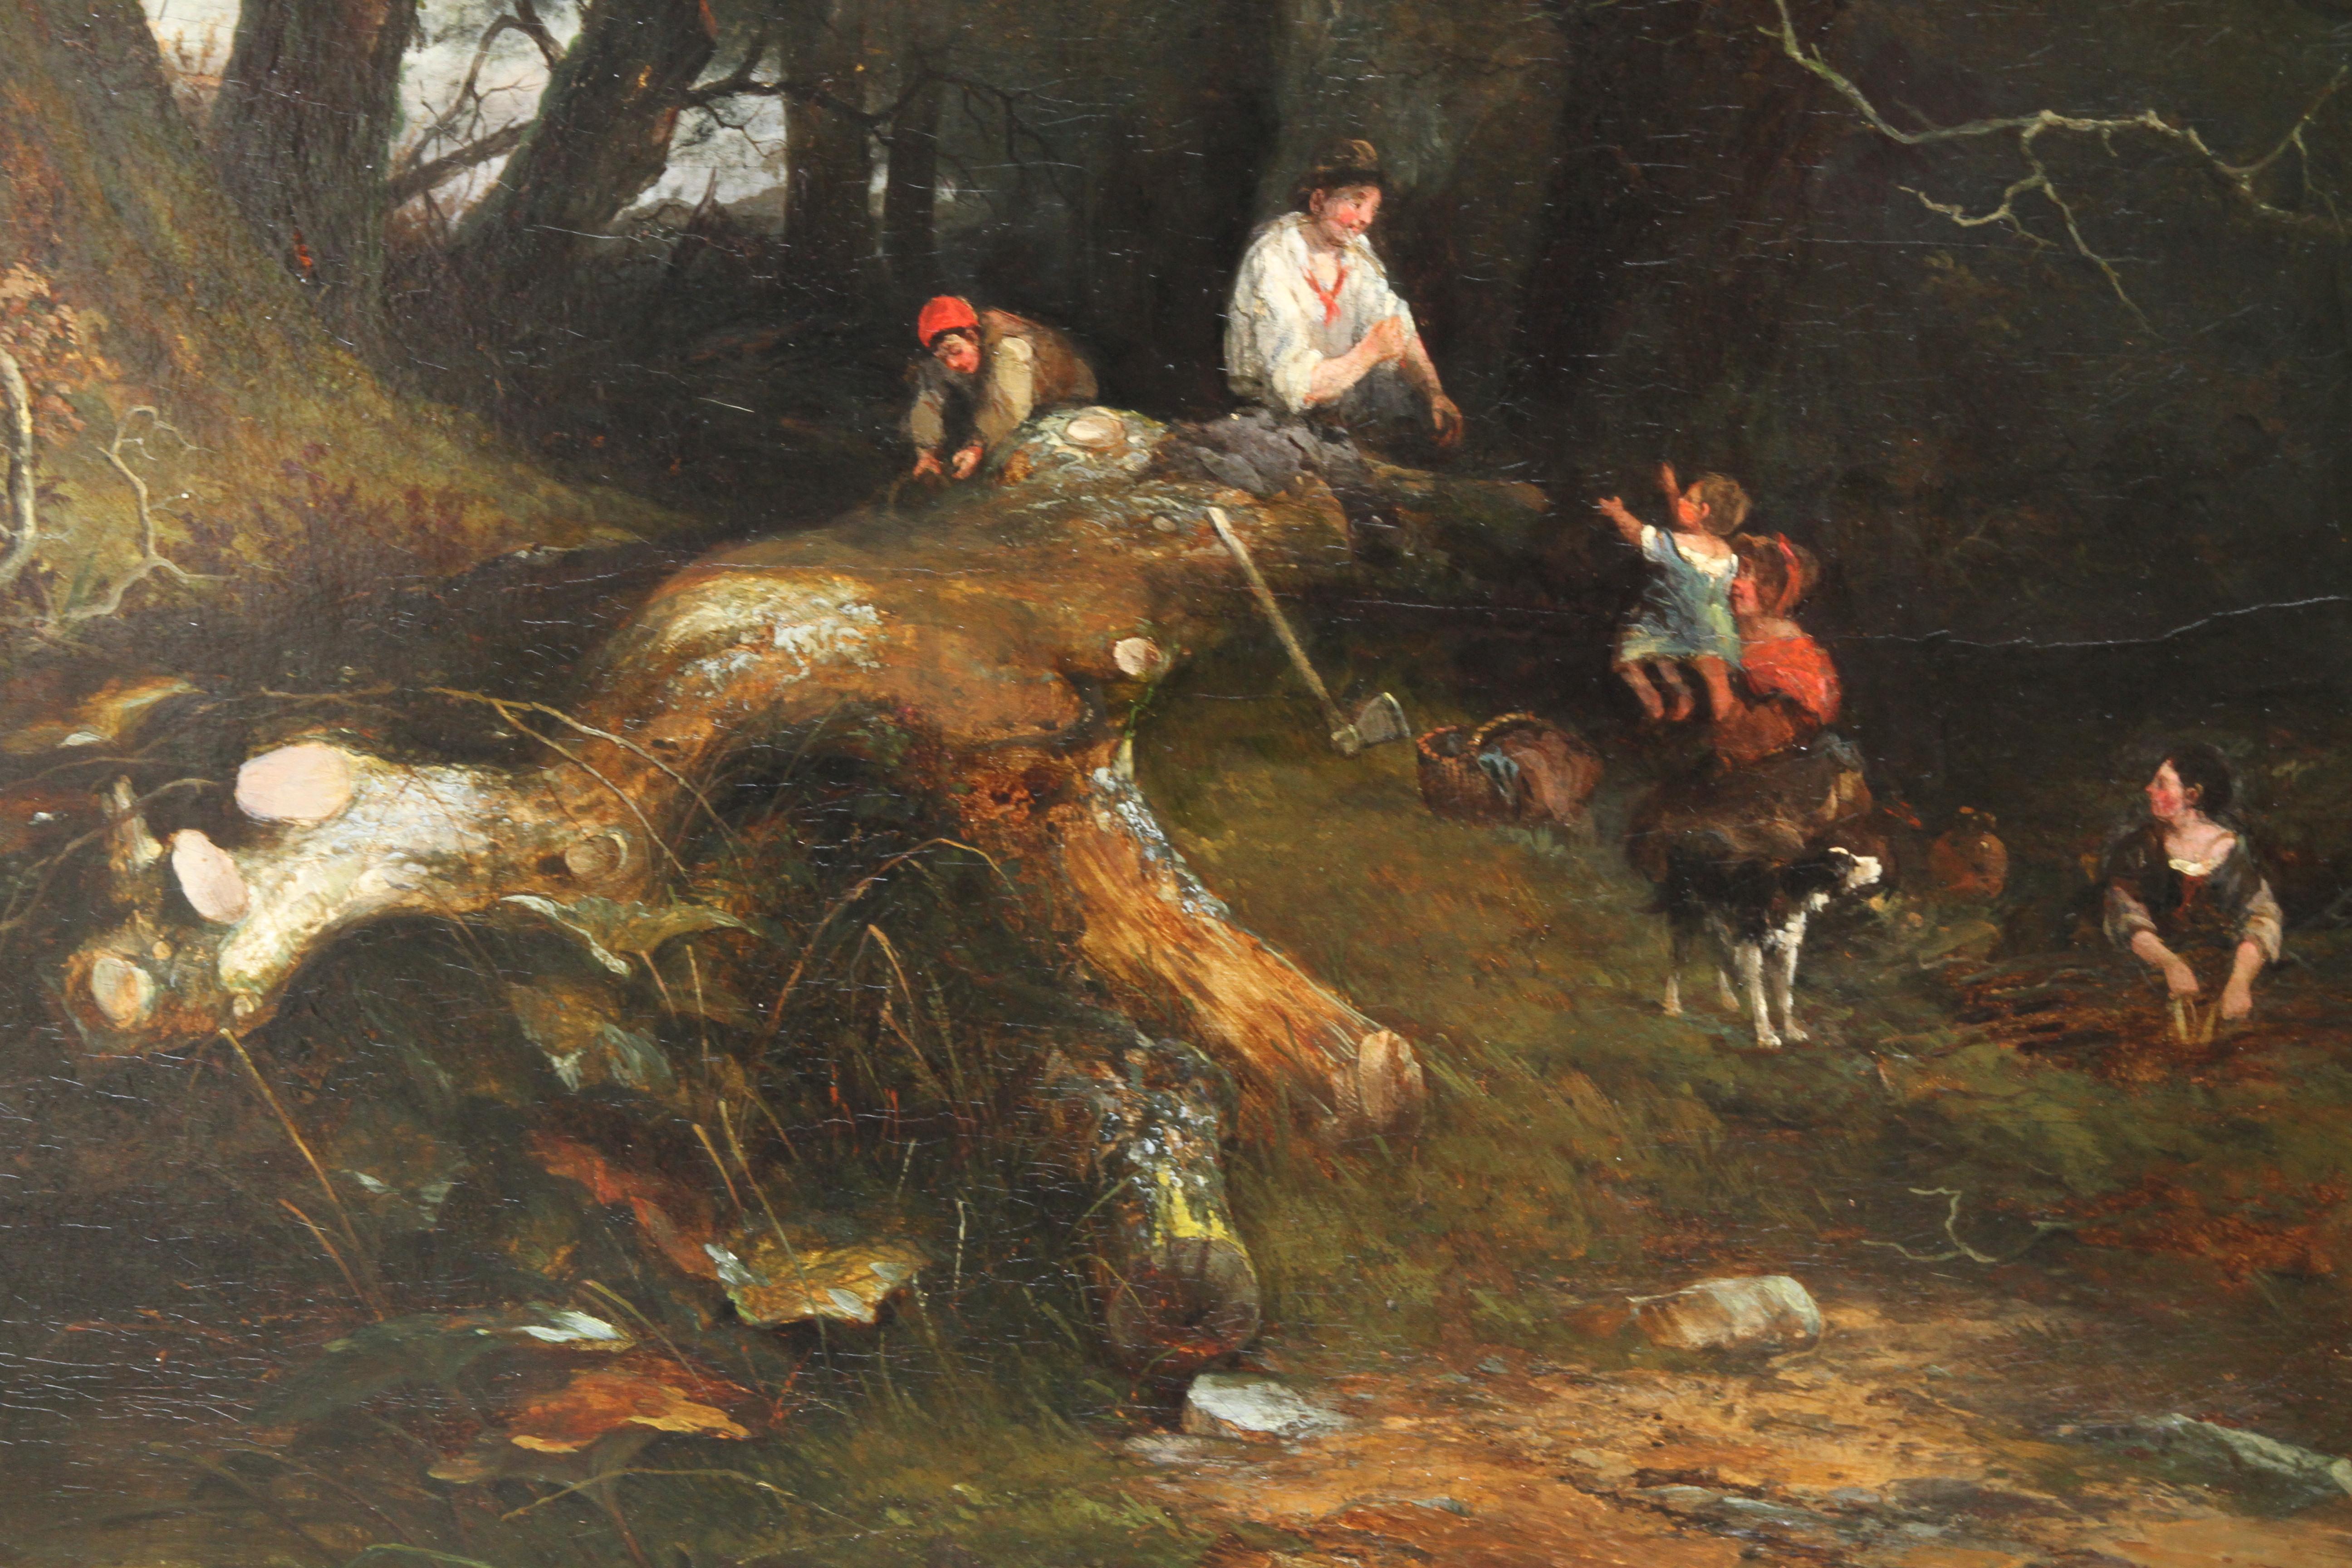 This lovely British Victorian oil painting is by Edward Charles Williams of the Williams Family of artists and related to George Morland. The painting is a figurative landscape entitled the Woodman's family and entails five figures and a dog